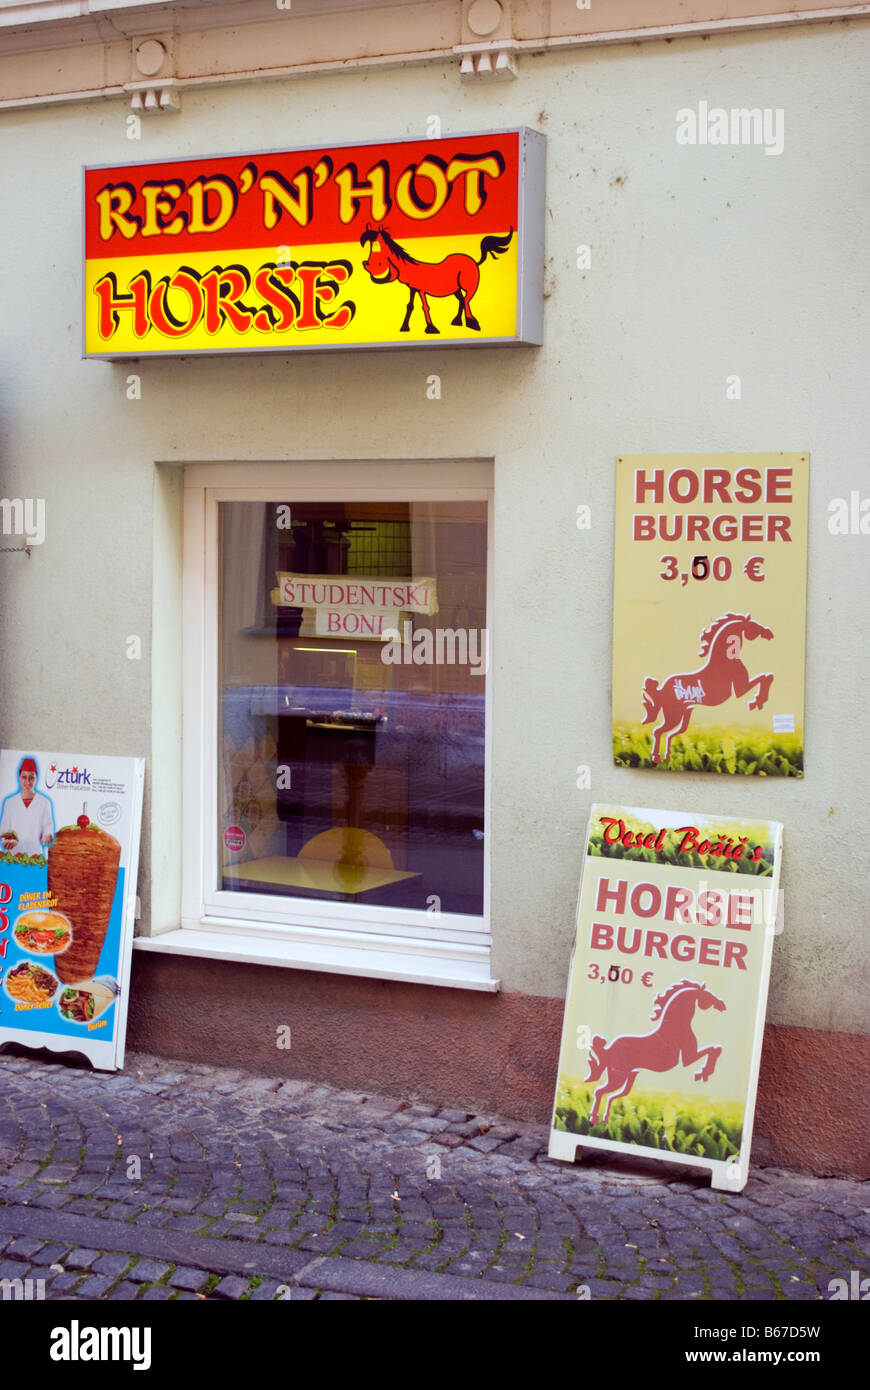 The Red 'n' Hot Horse café, in Ljubljana's old town which sells 'horse burgers' considered a local delicacy Stock Photo